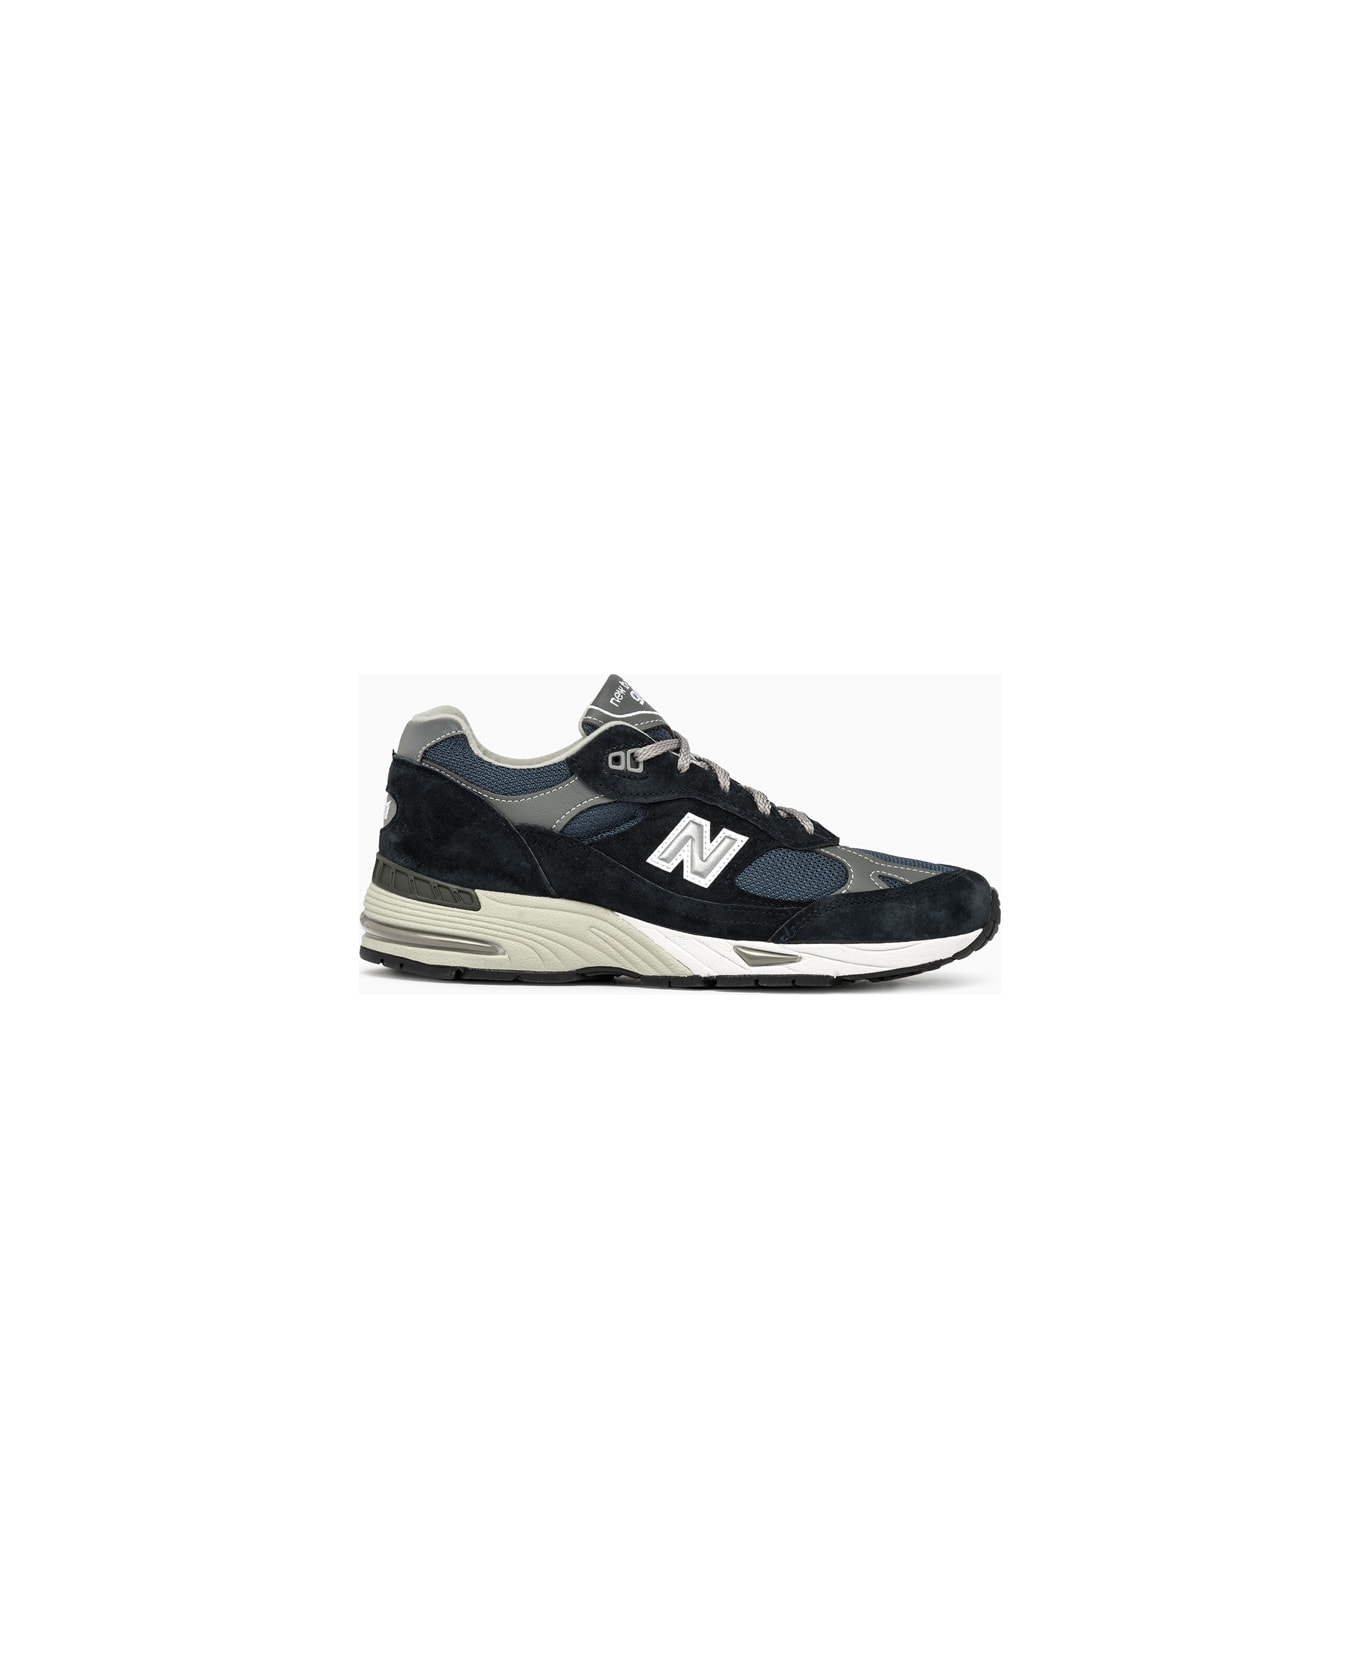 New Balance 991v1 Made In Uk Sneakers W991nv - Blue スニーカー